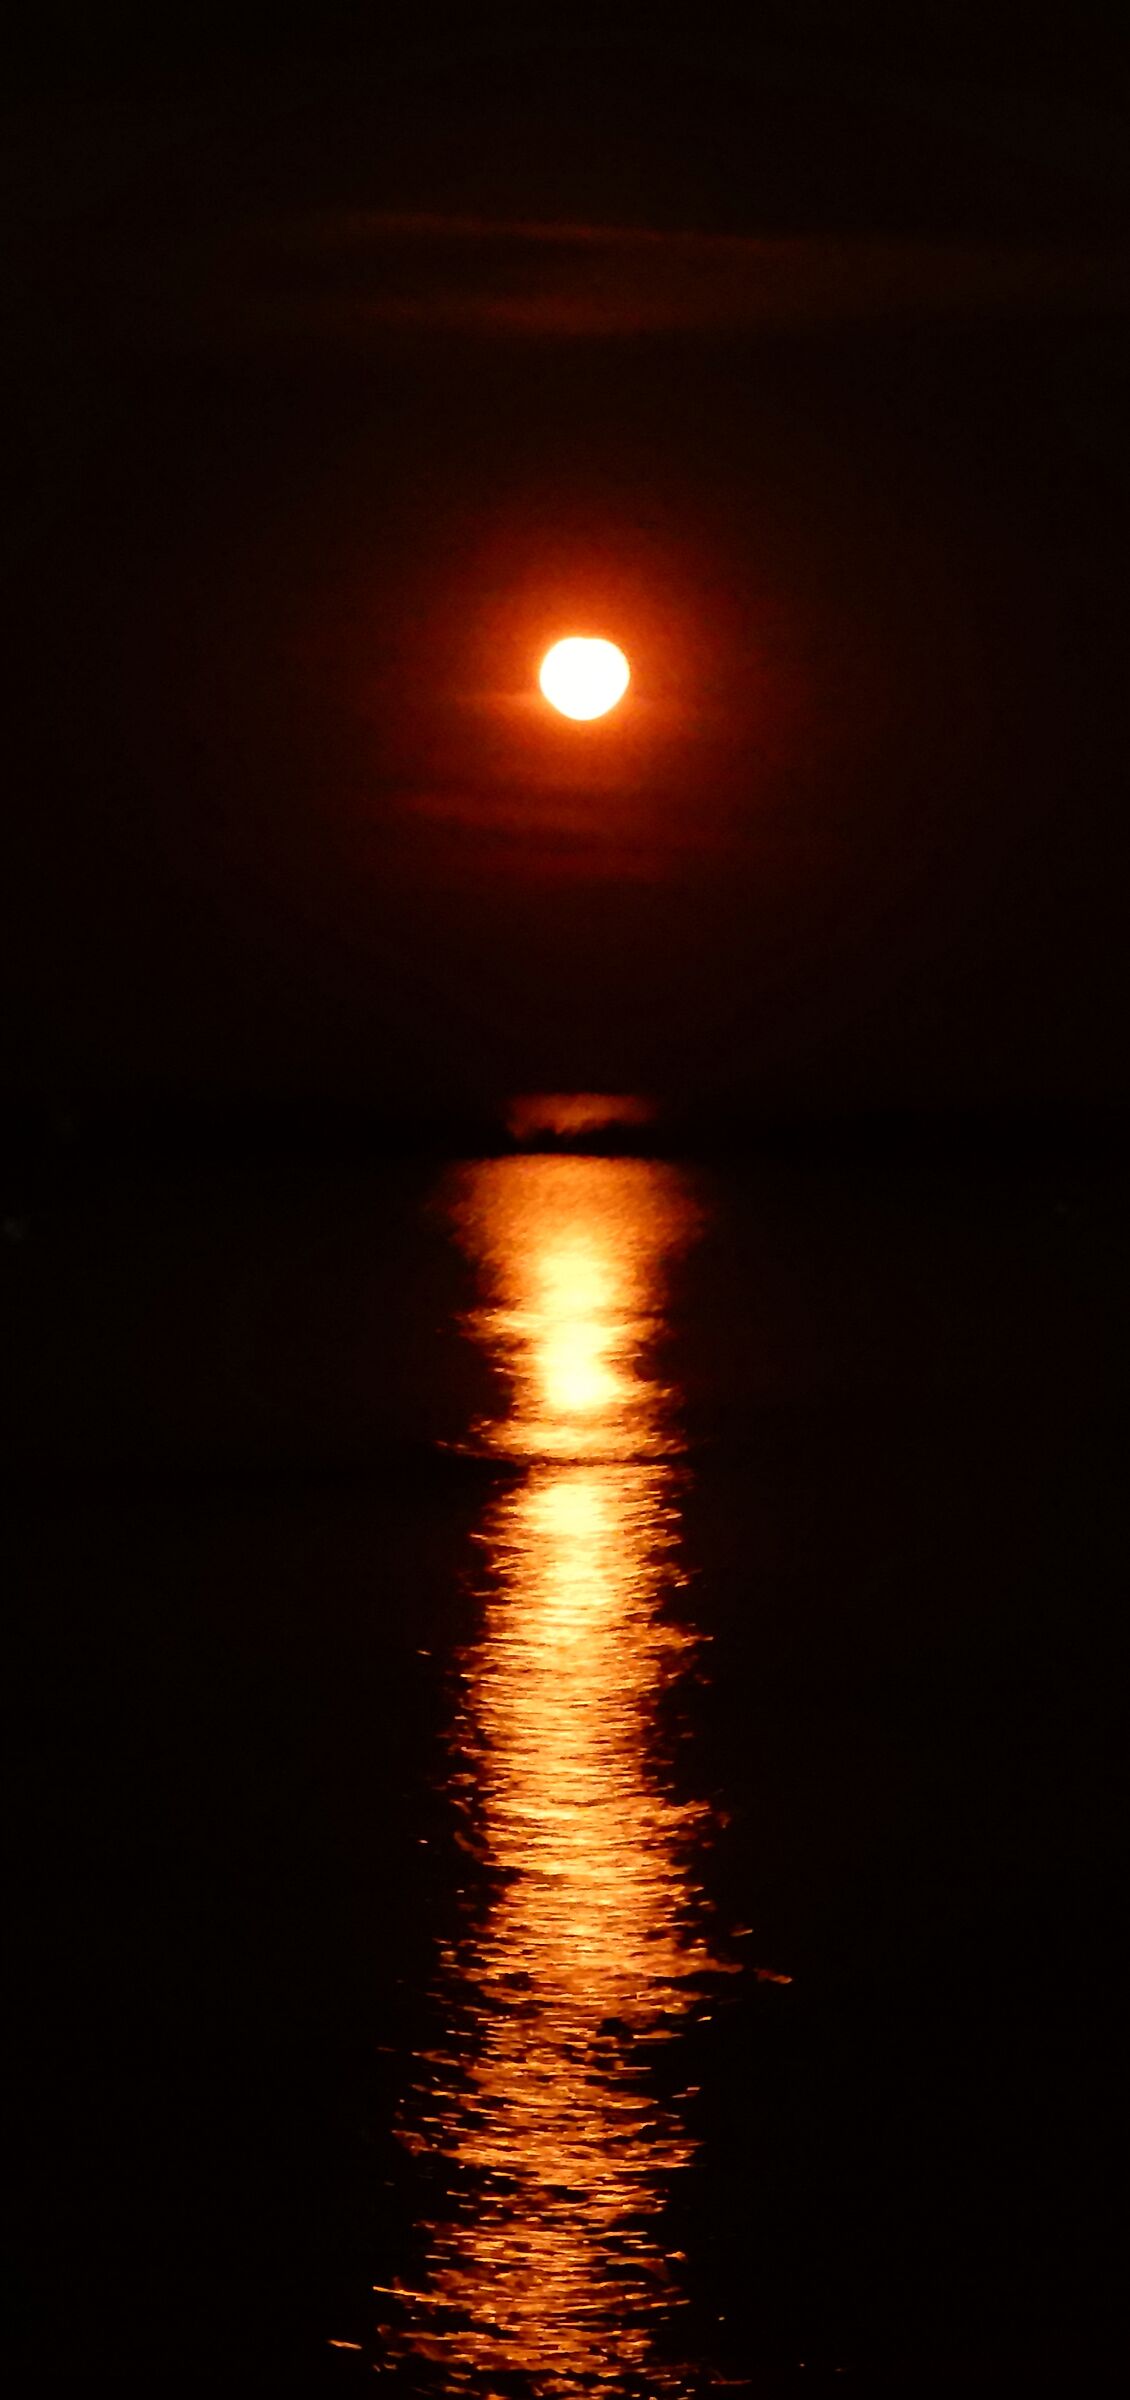 Red moon reflected on the sea...